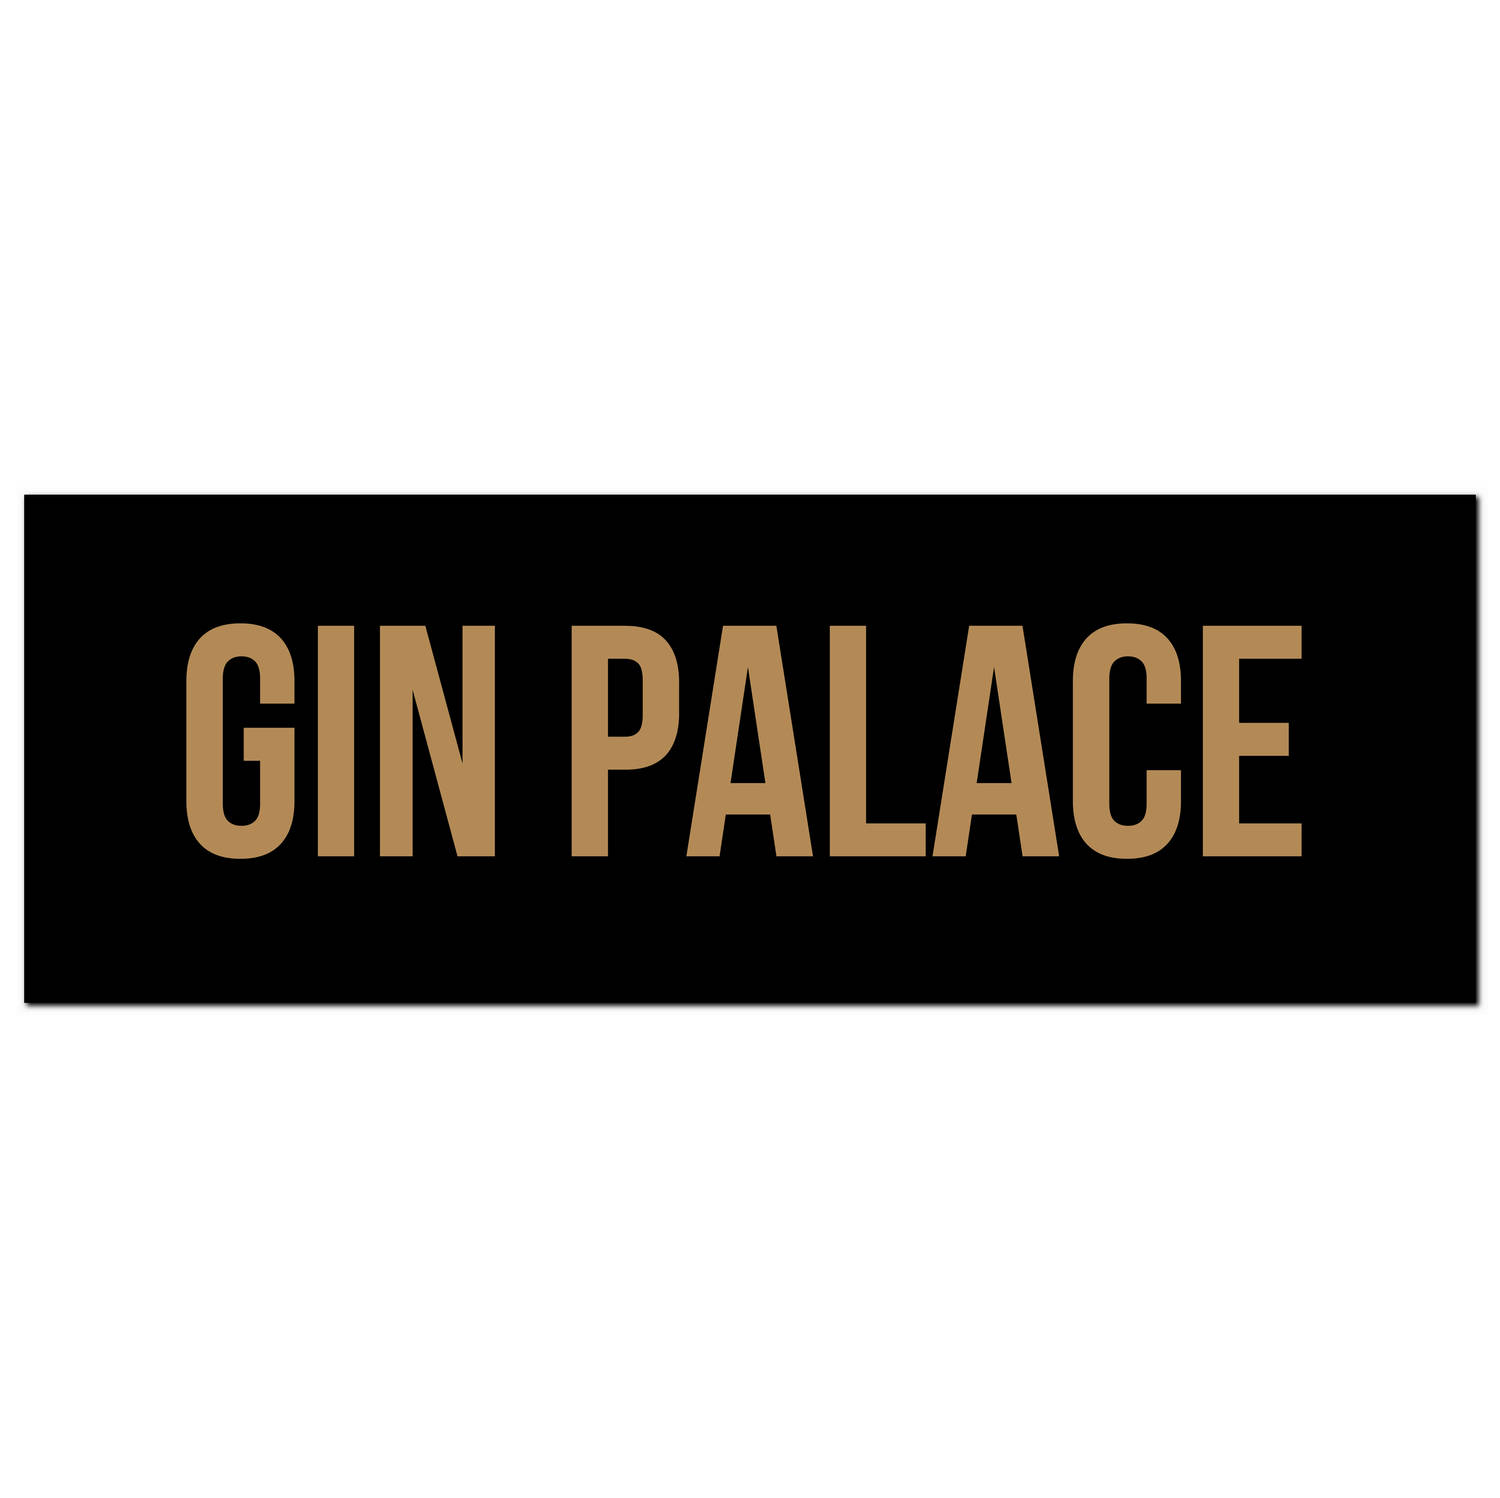 Gin Palace Gold Foil Plaque - Image 1